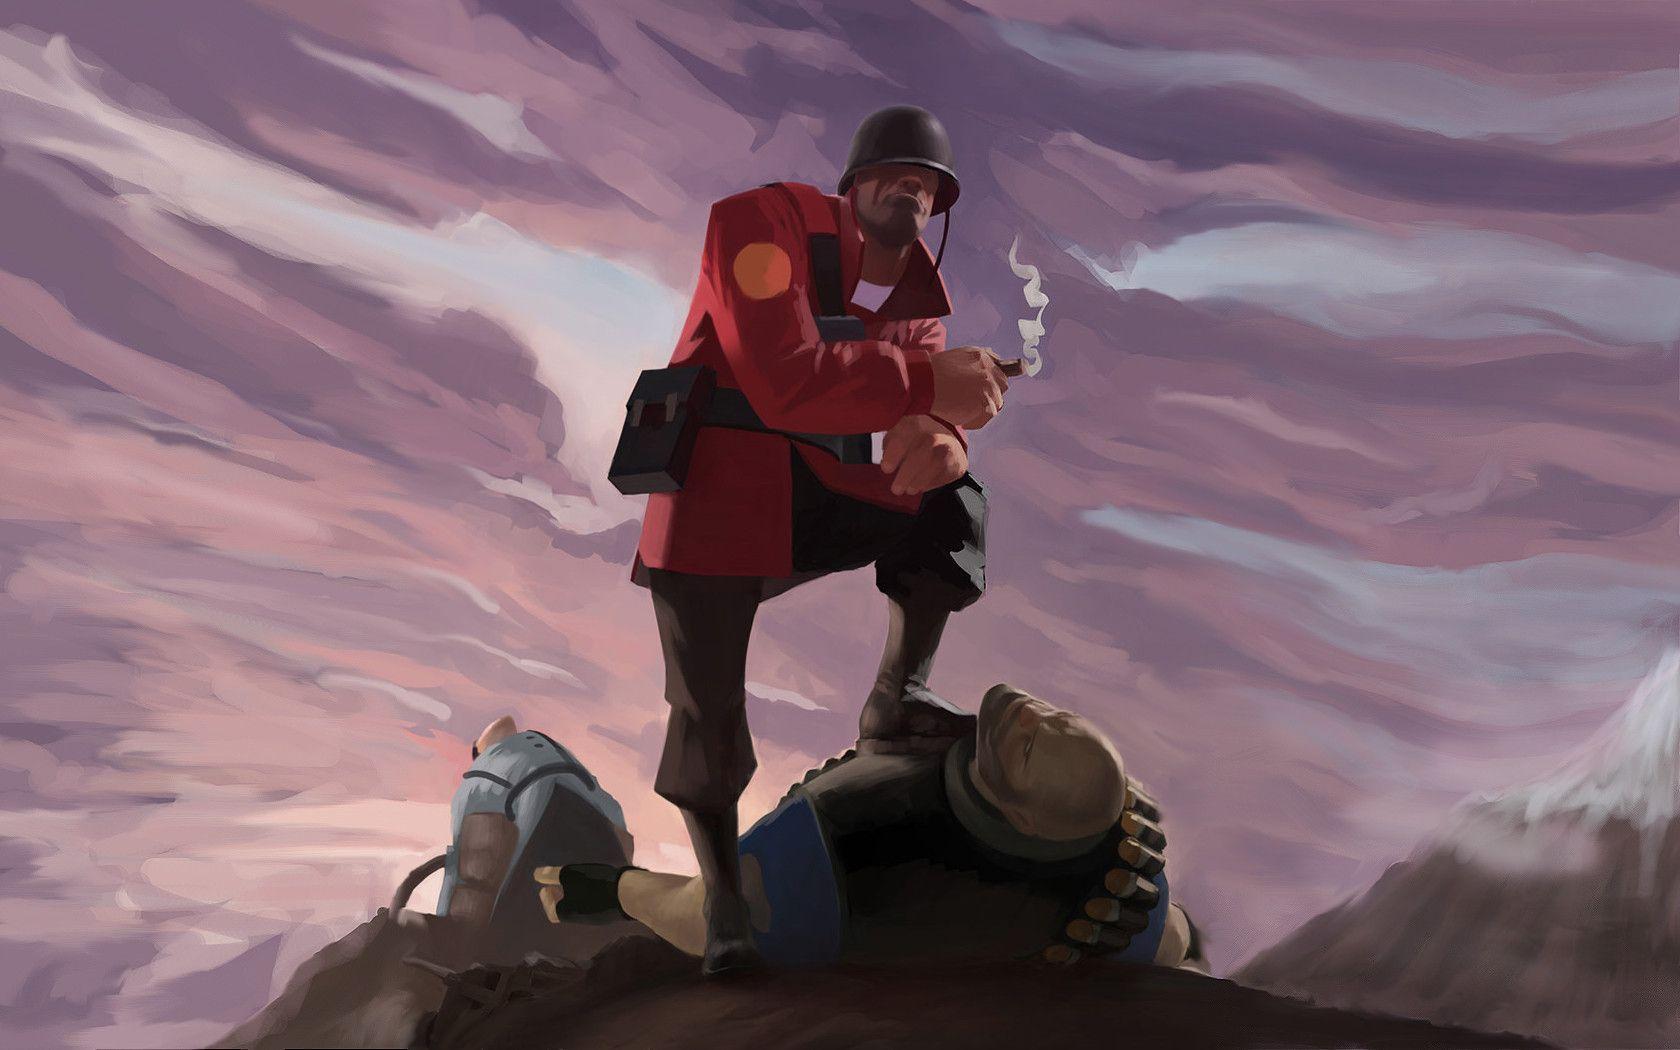  Team  Fortress  2 Soldier  Wallpapers Wallpaper Cave